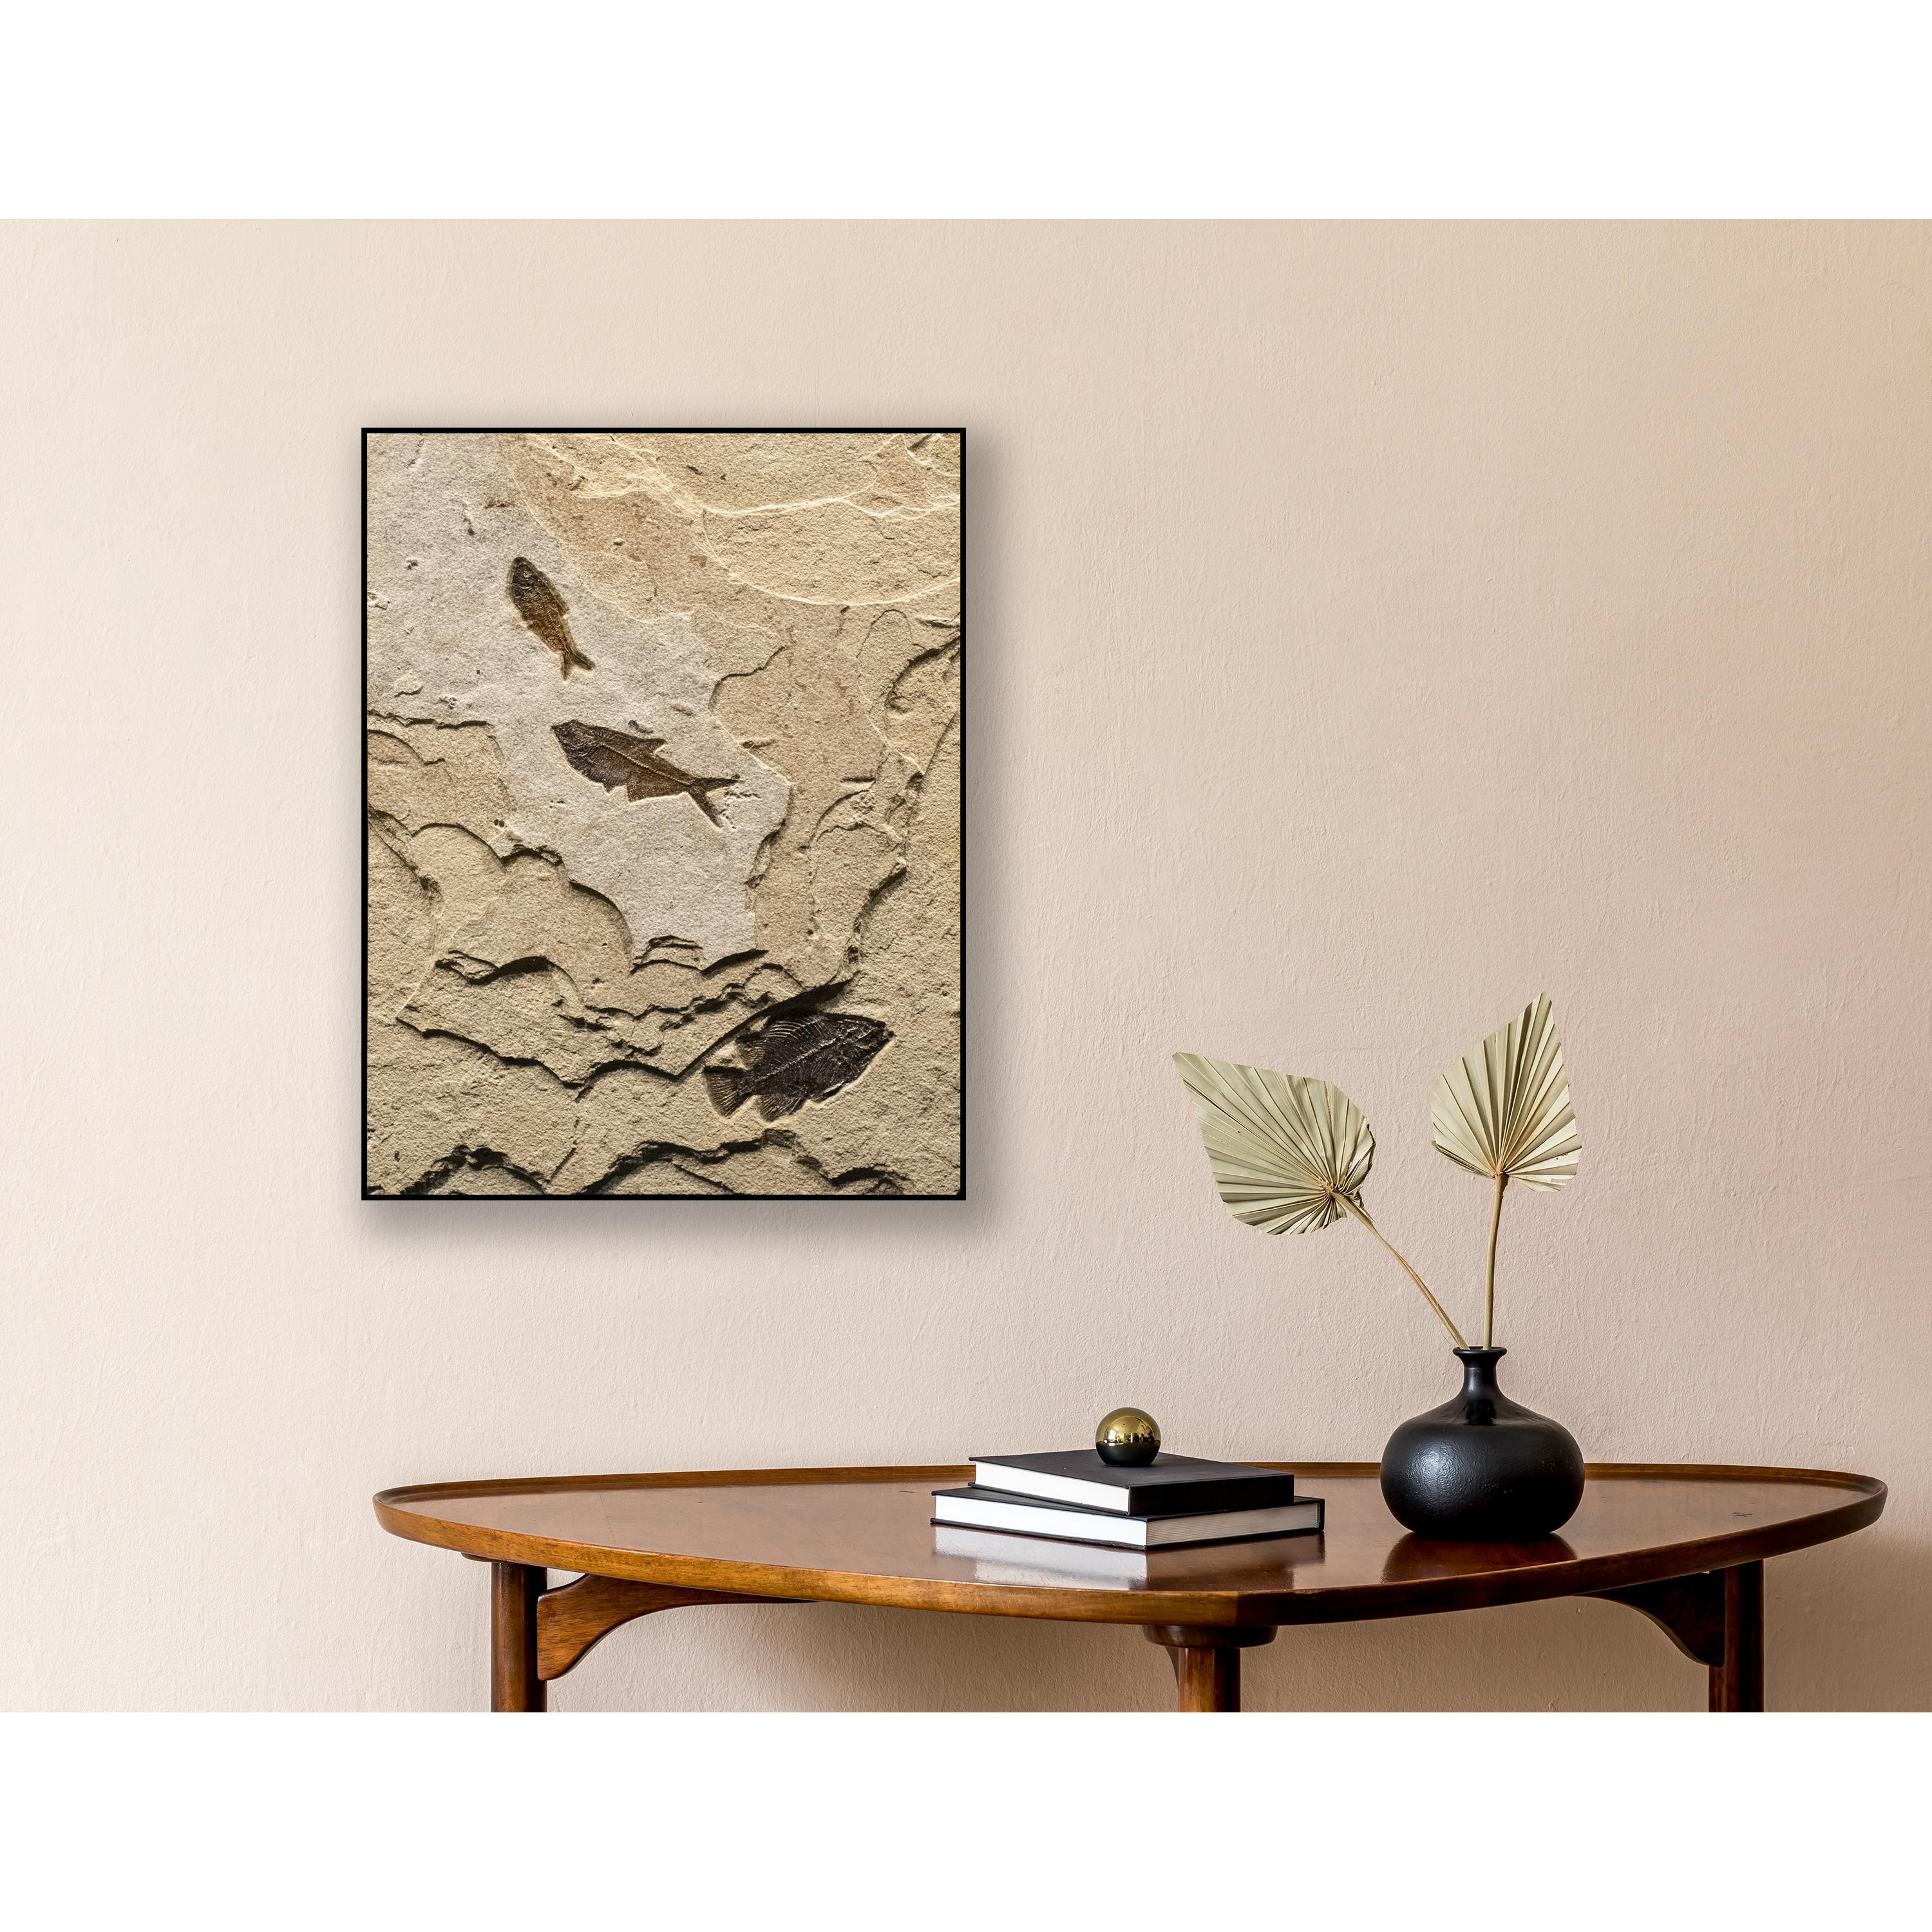 This exquisite fossil mural features a Cockerellites liops (formerly known as Priscacara) and two Diplomystus dentatus, all of which are Eocene era fossils dating back about 50 million years. These ancient fish are forever preserved in a textured